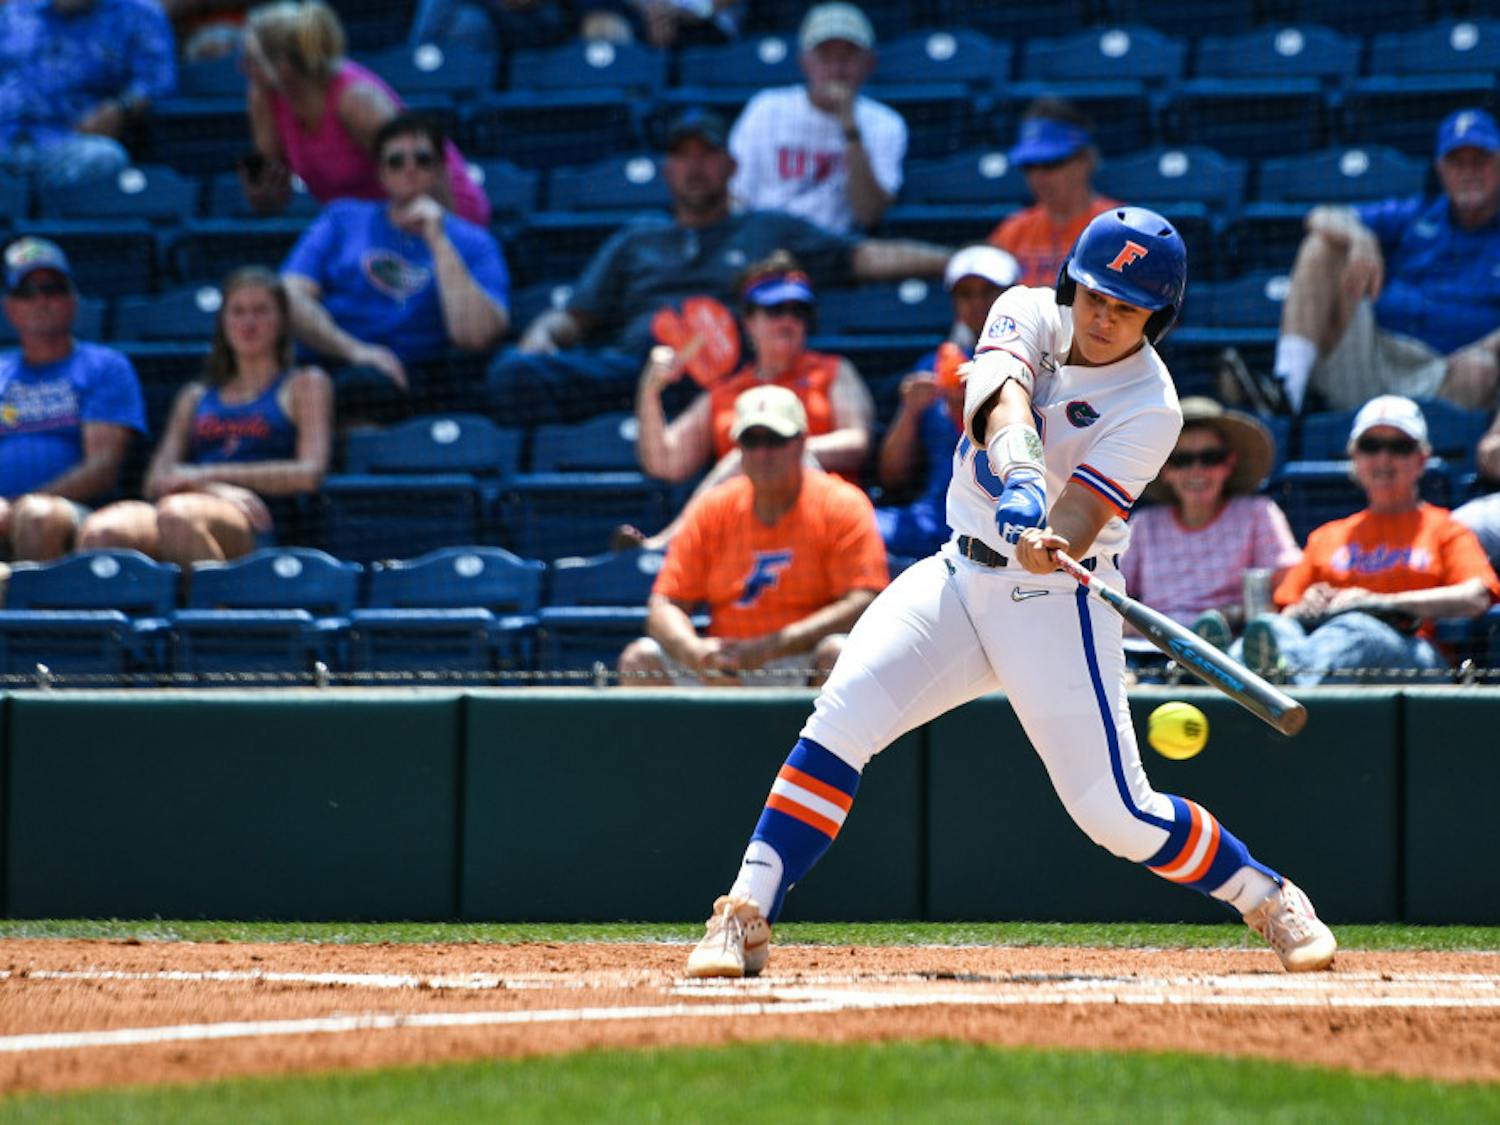 The Gators managed only one hit in Friday's loss to Mississippi State.